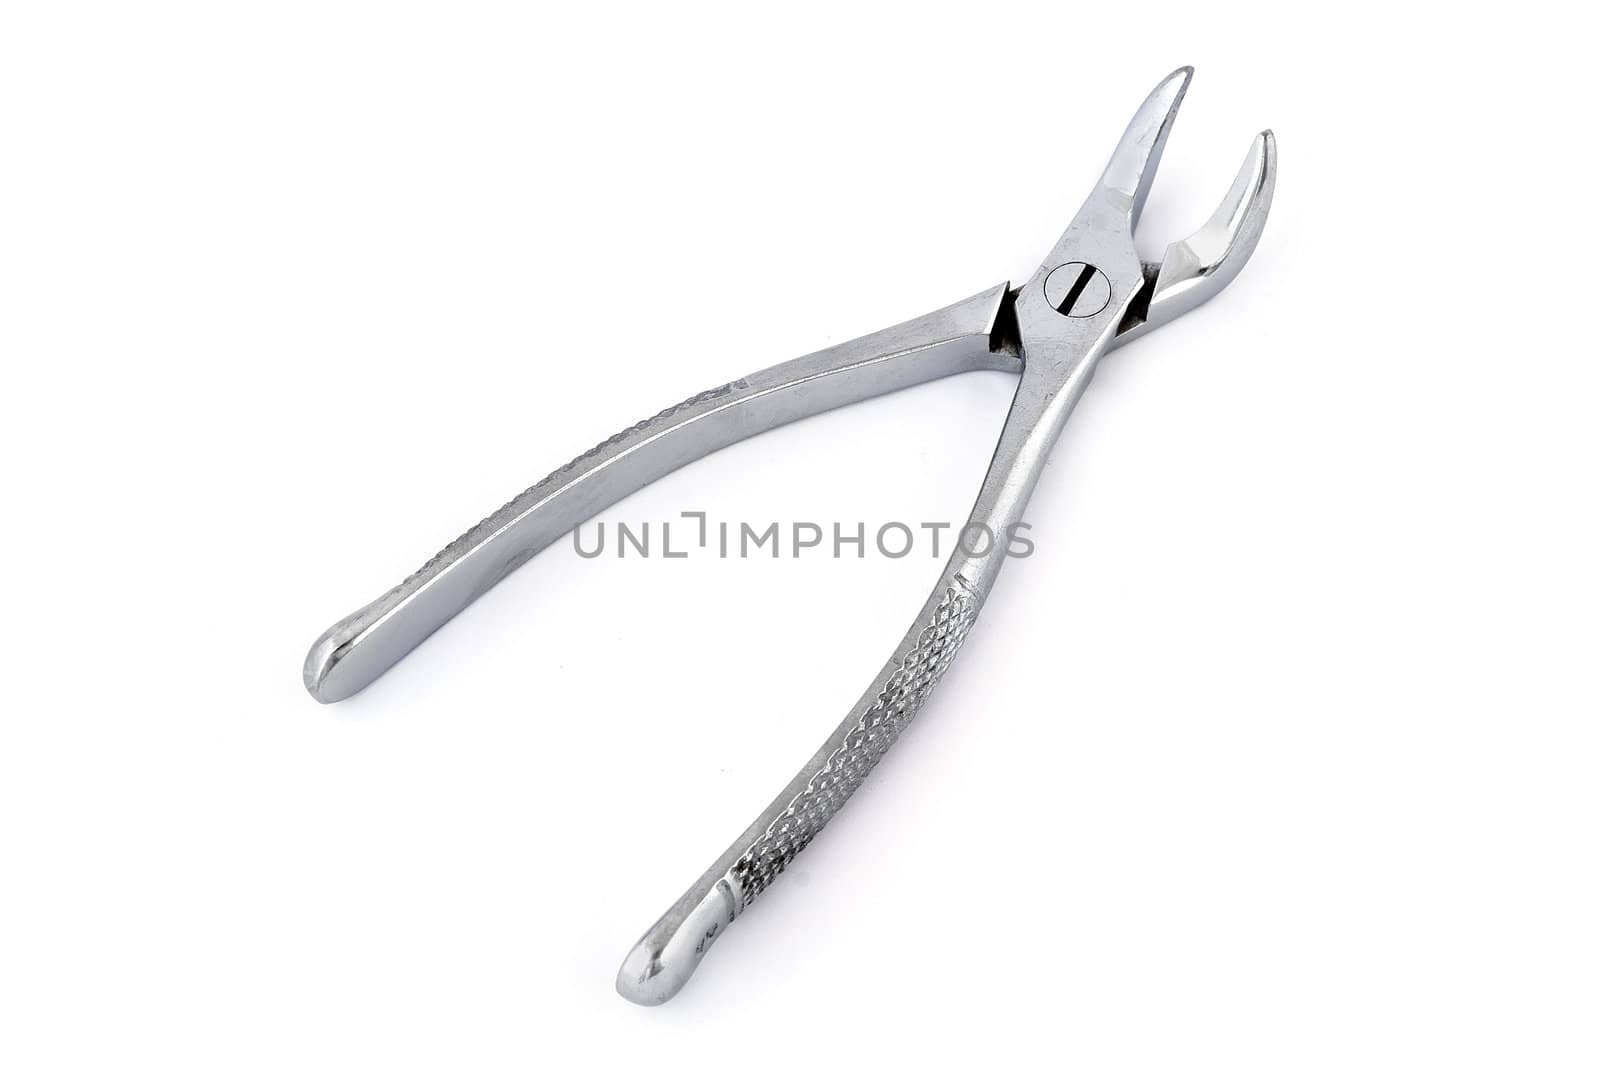 dental pliers on a white background